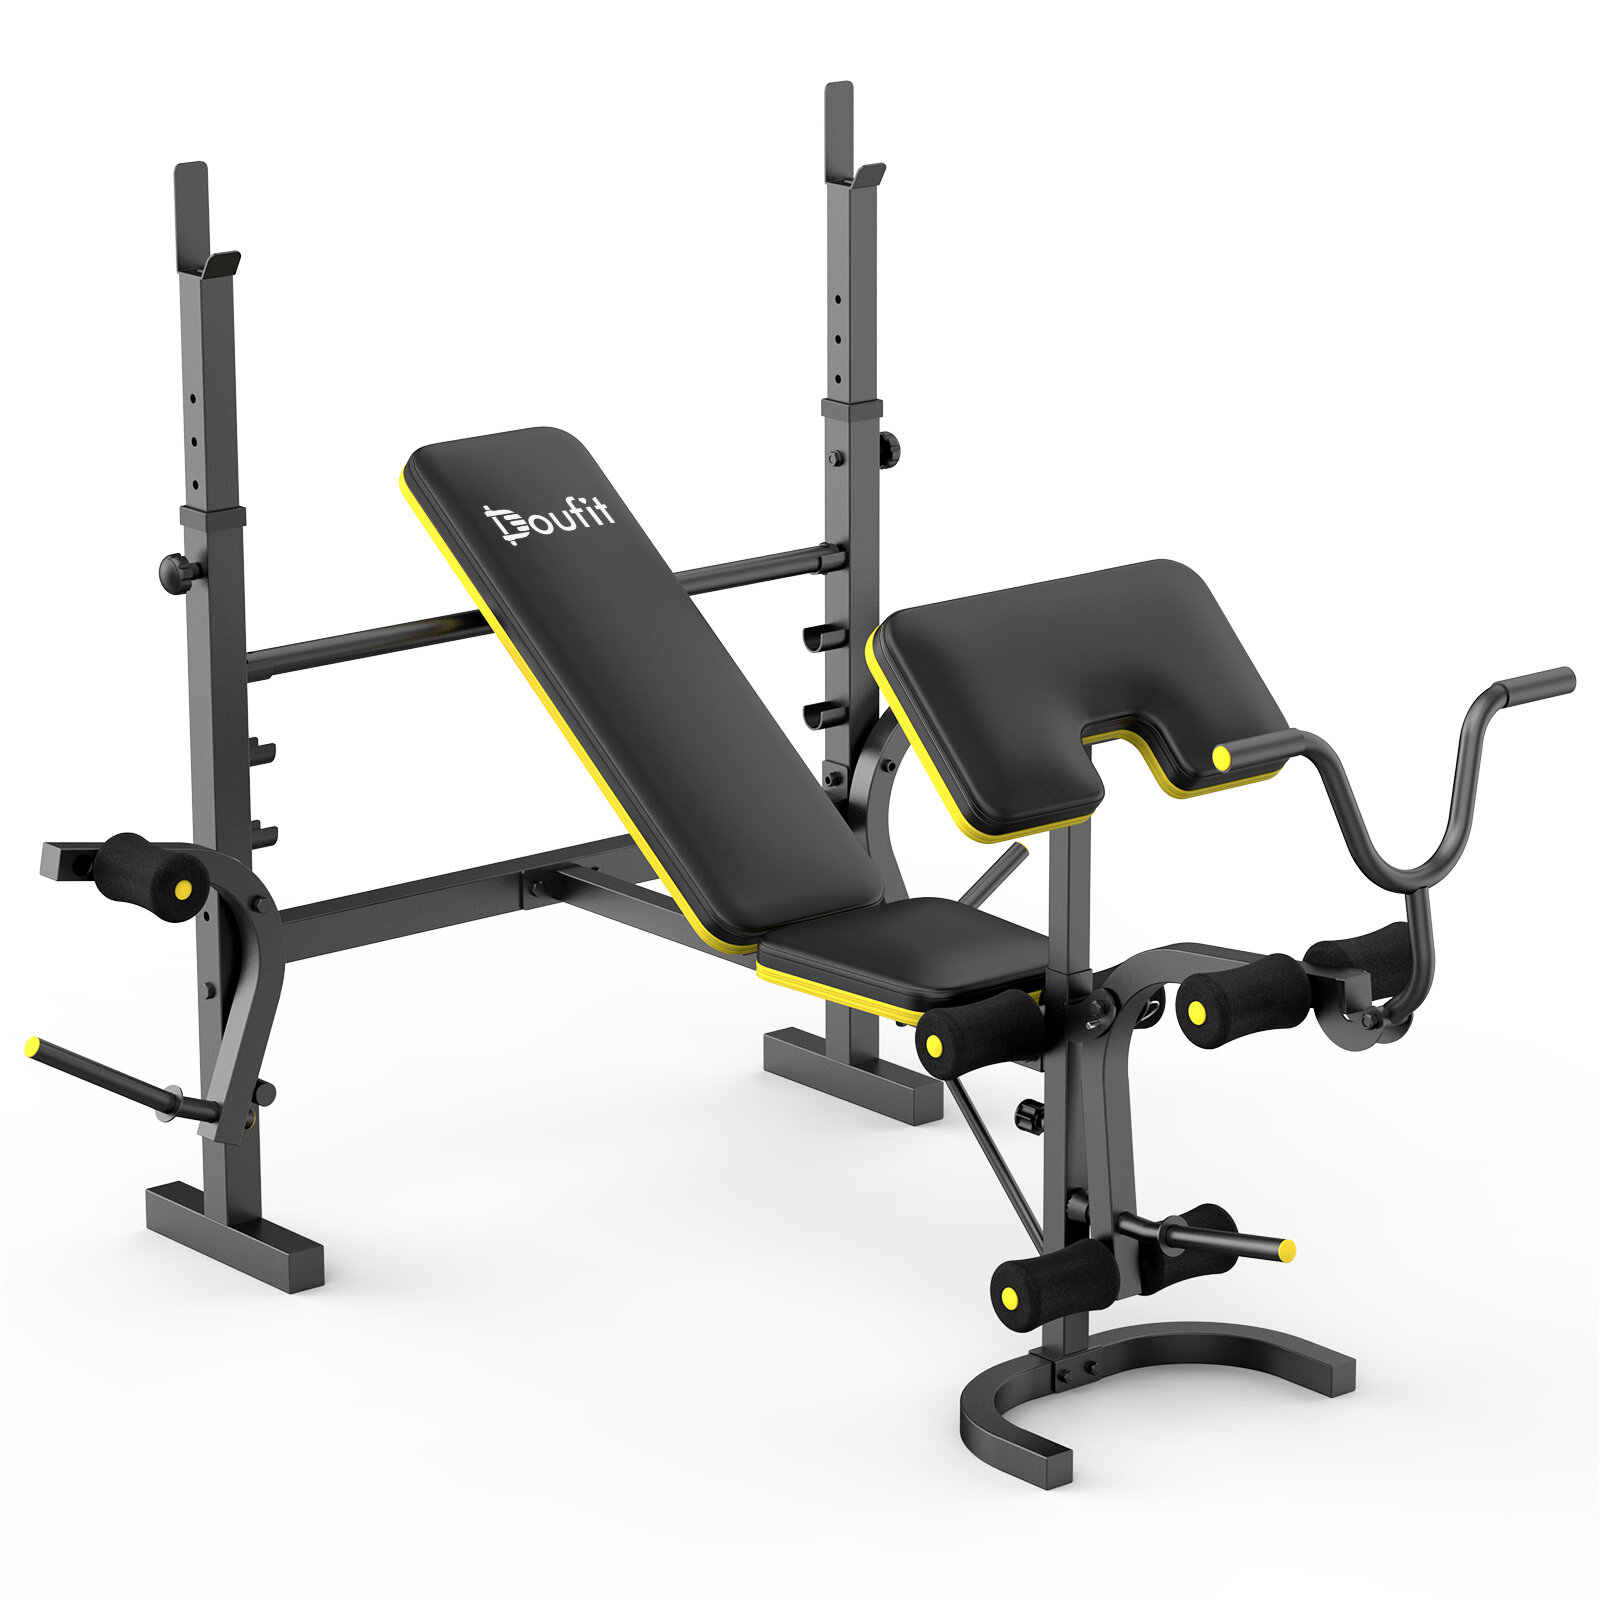 best price,doufit,wb,weight,bench,270kg,eu,coupon,price,discount